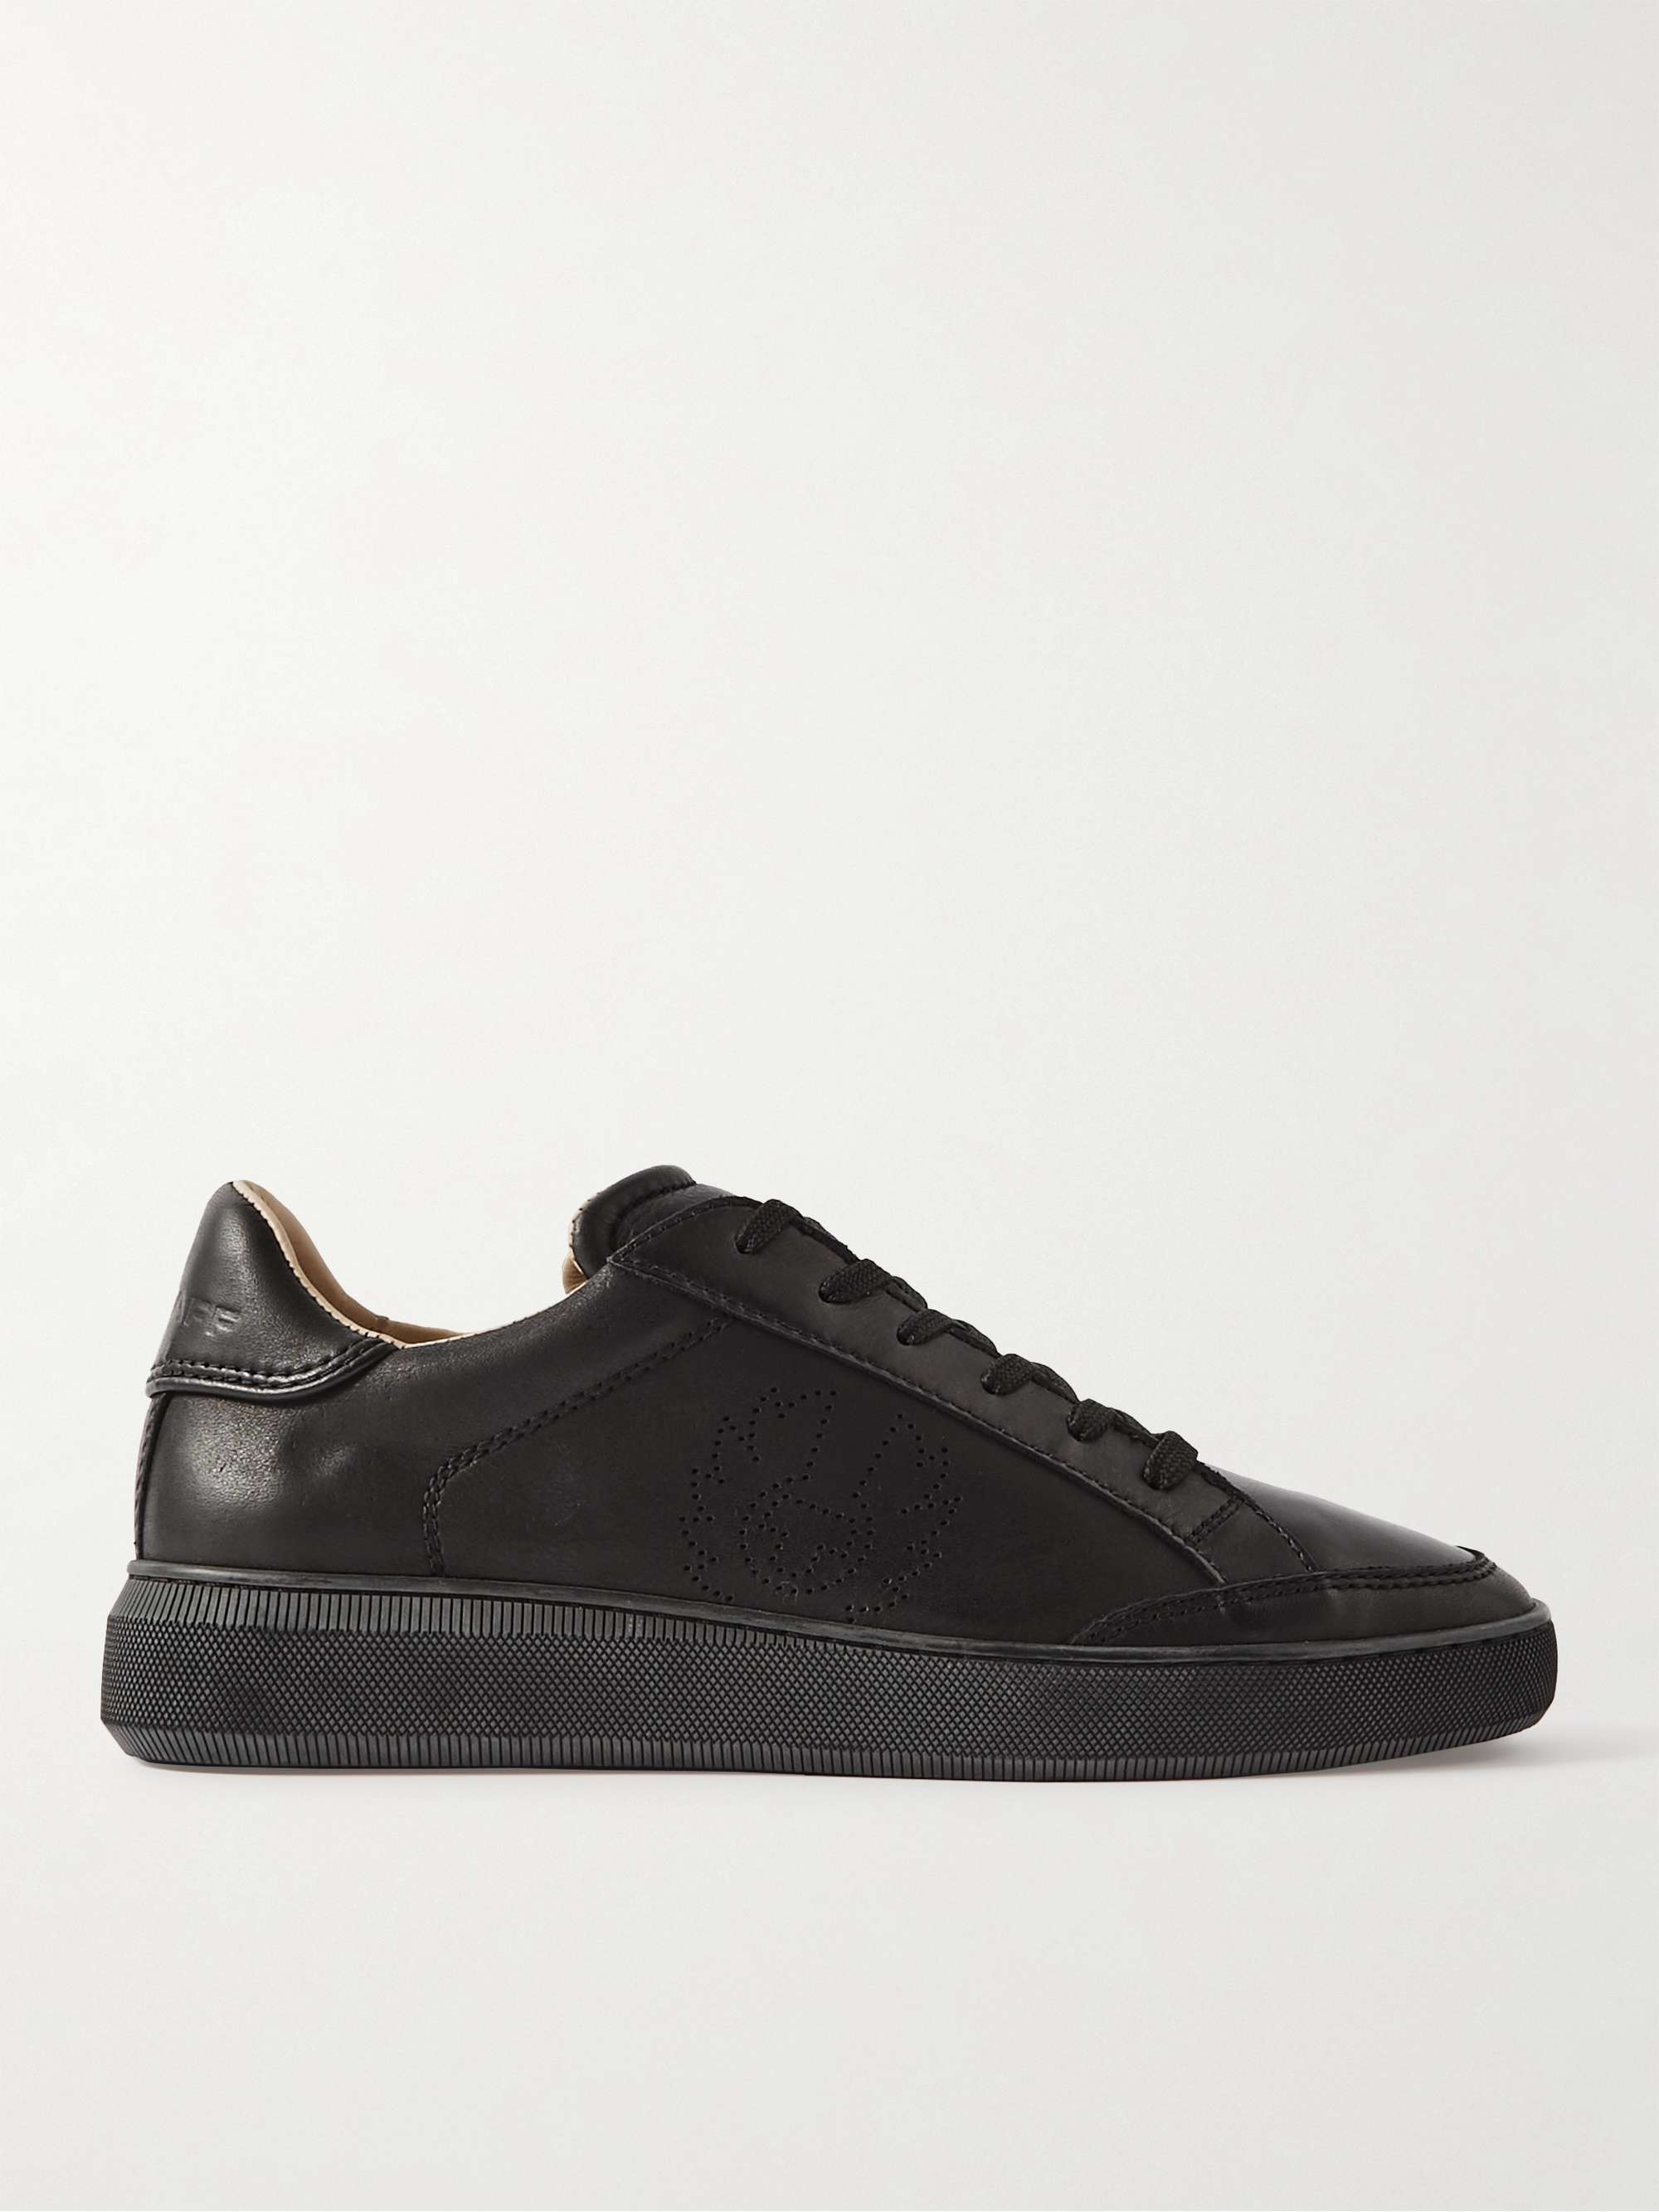 BELSTAFF Track Logo-Perforated Leather Sneakers | MR PORTER